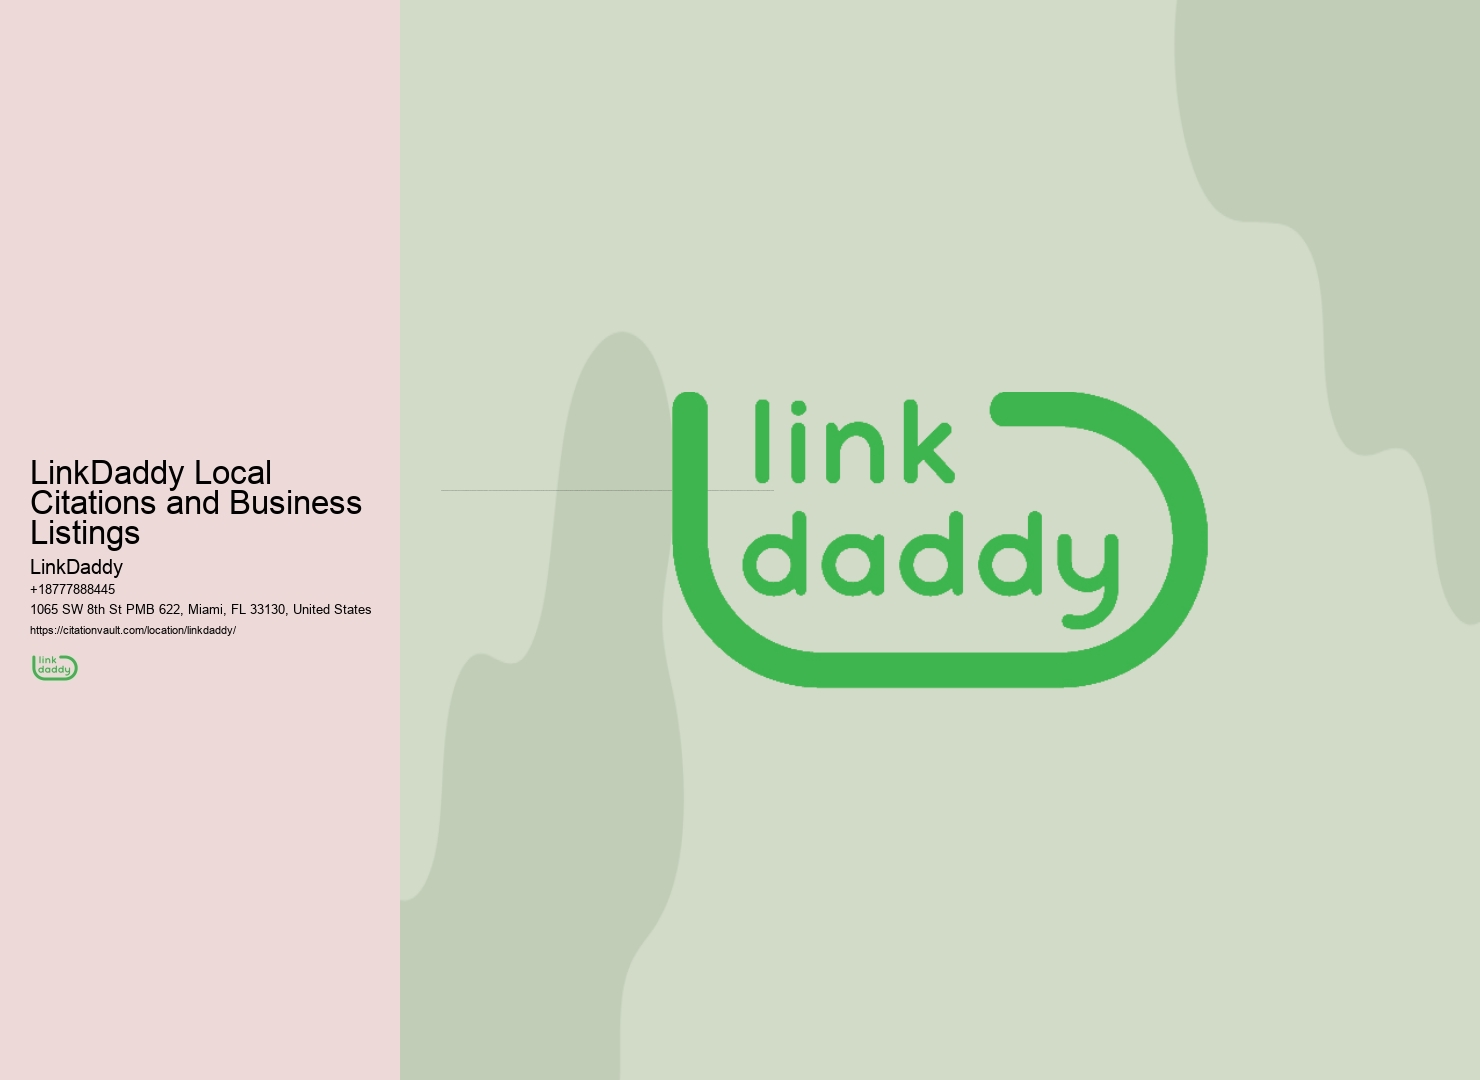 LinkDaddy Local Citations and Business Listings